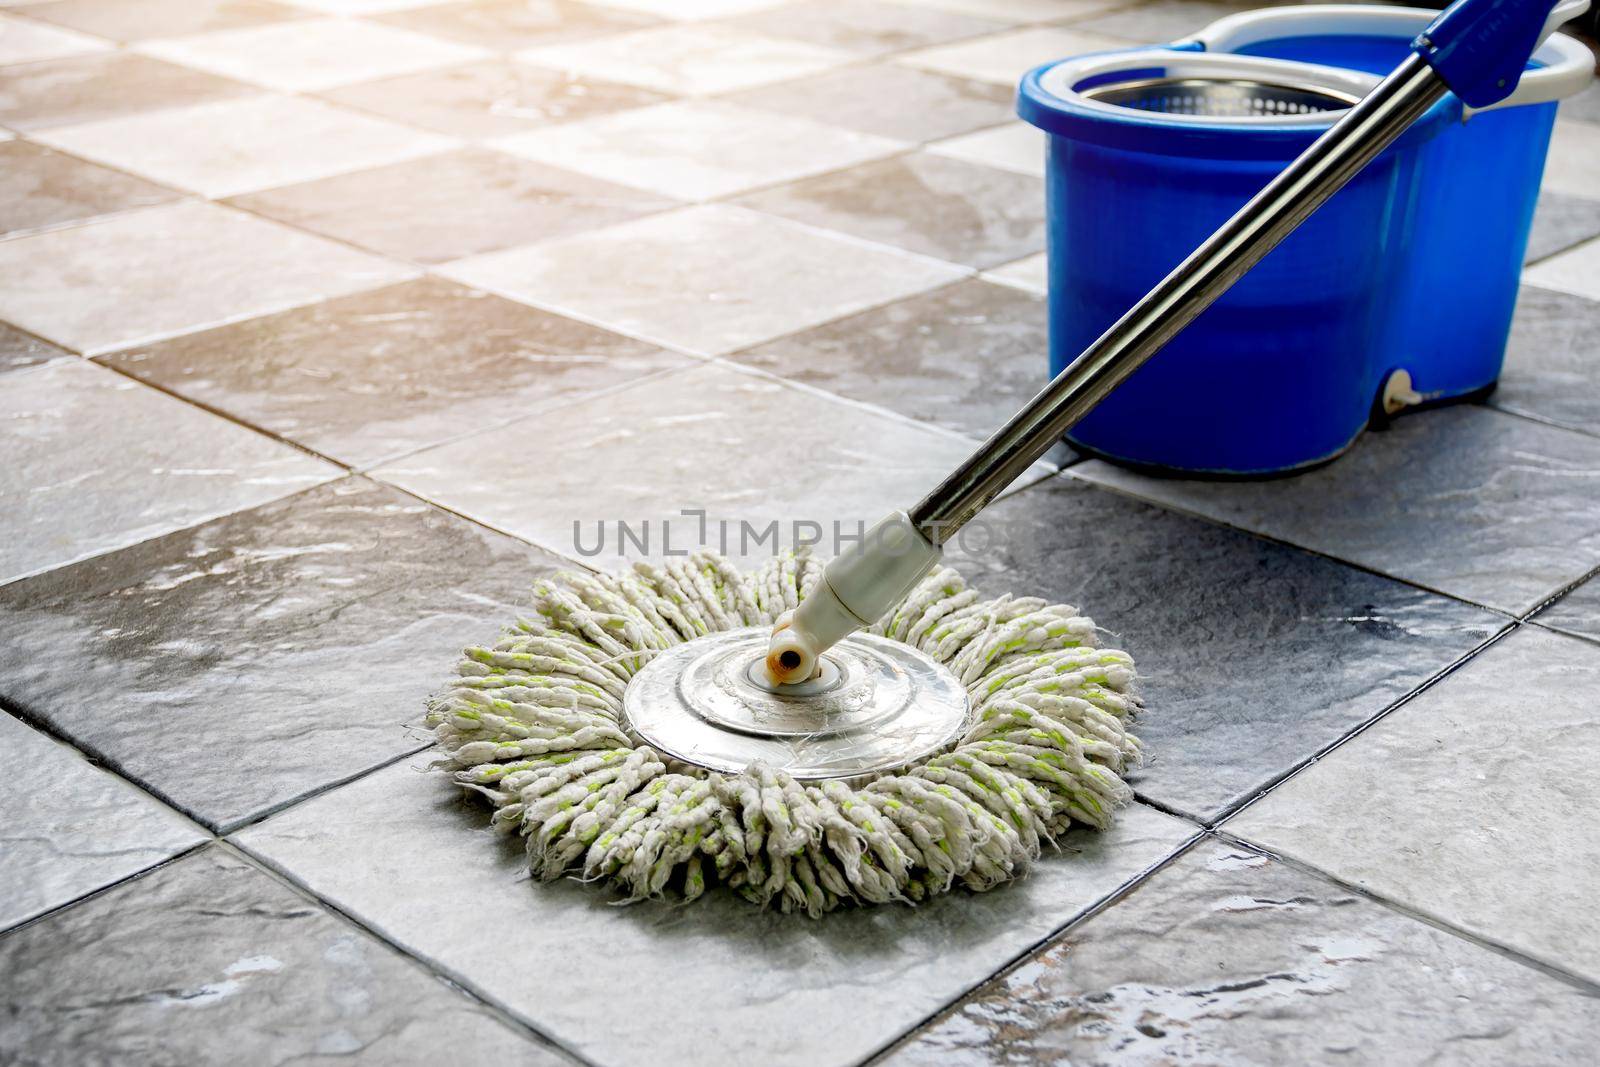 Clean tile floors with mops and floor cleaning products.